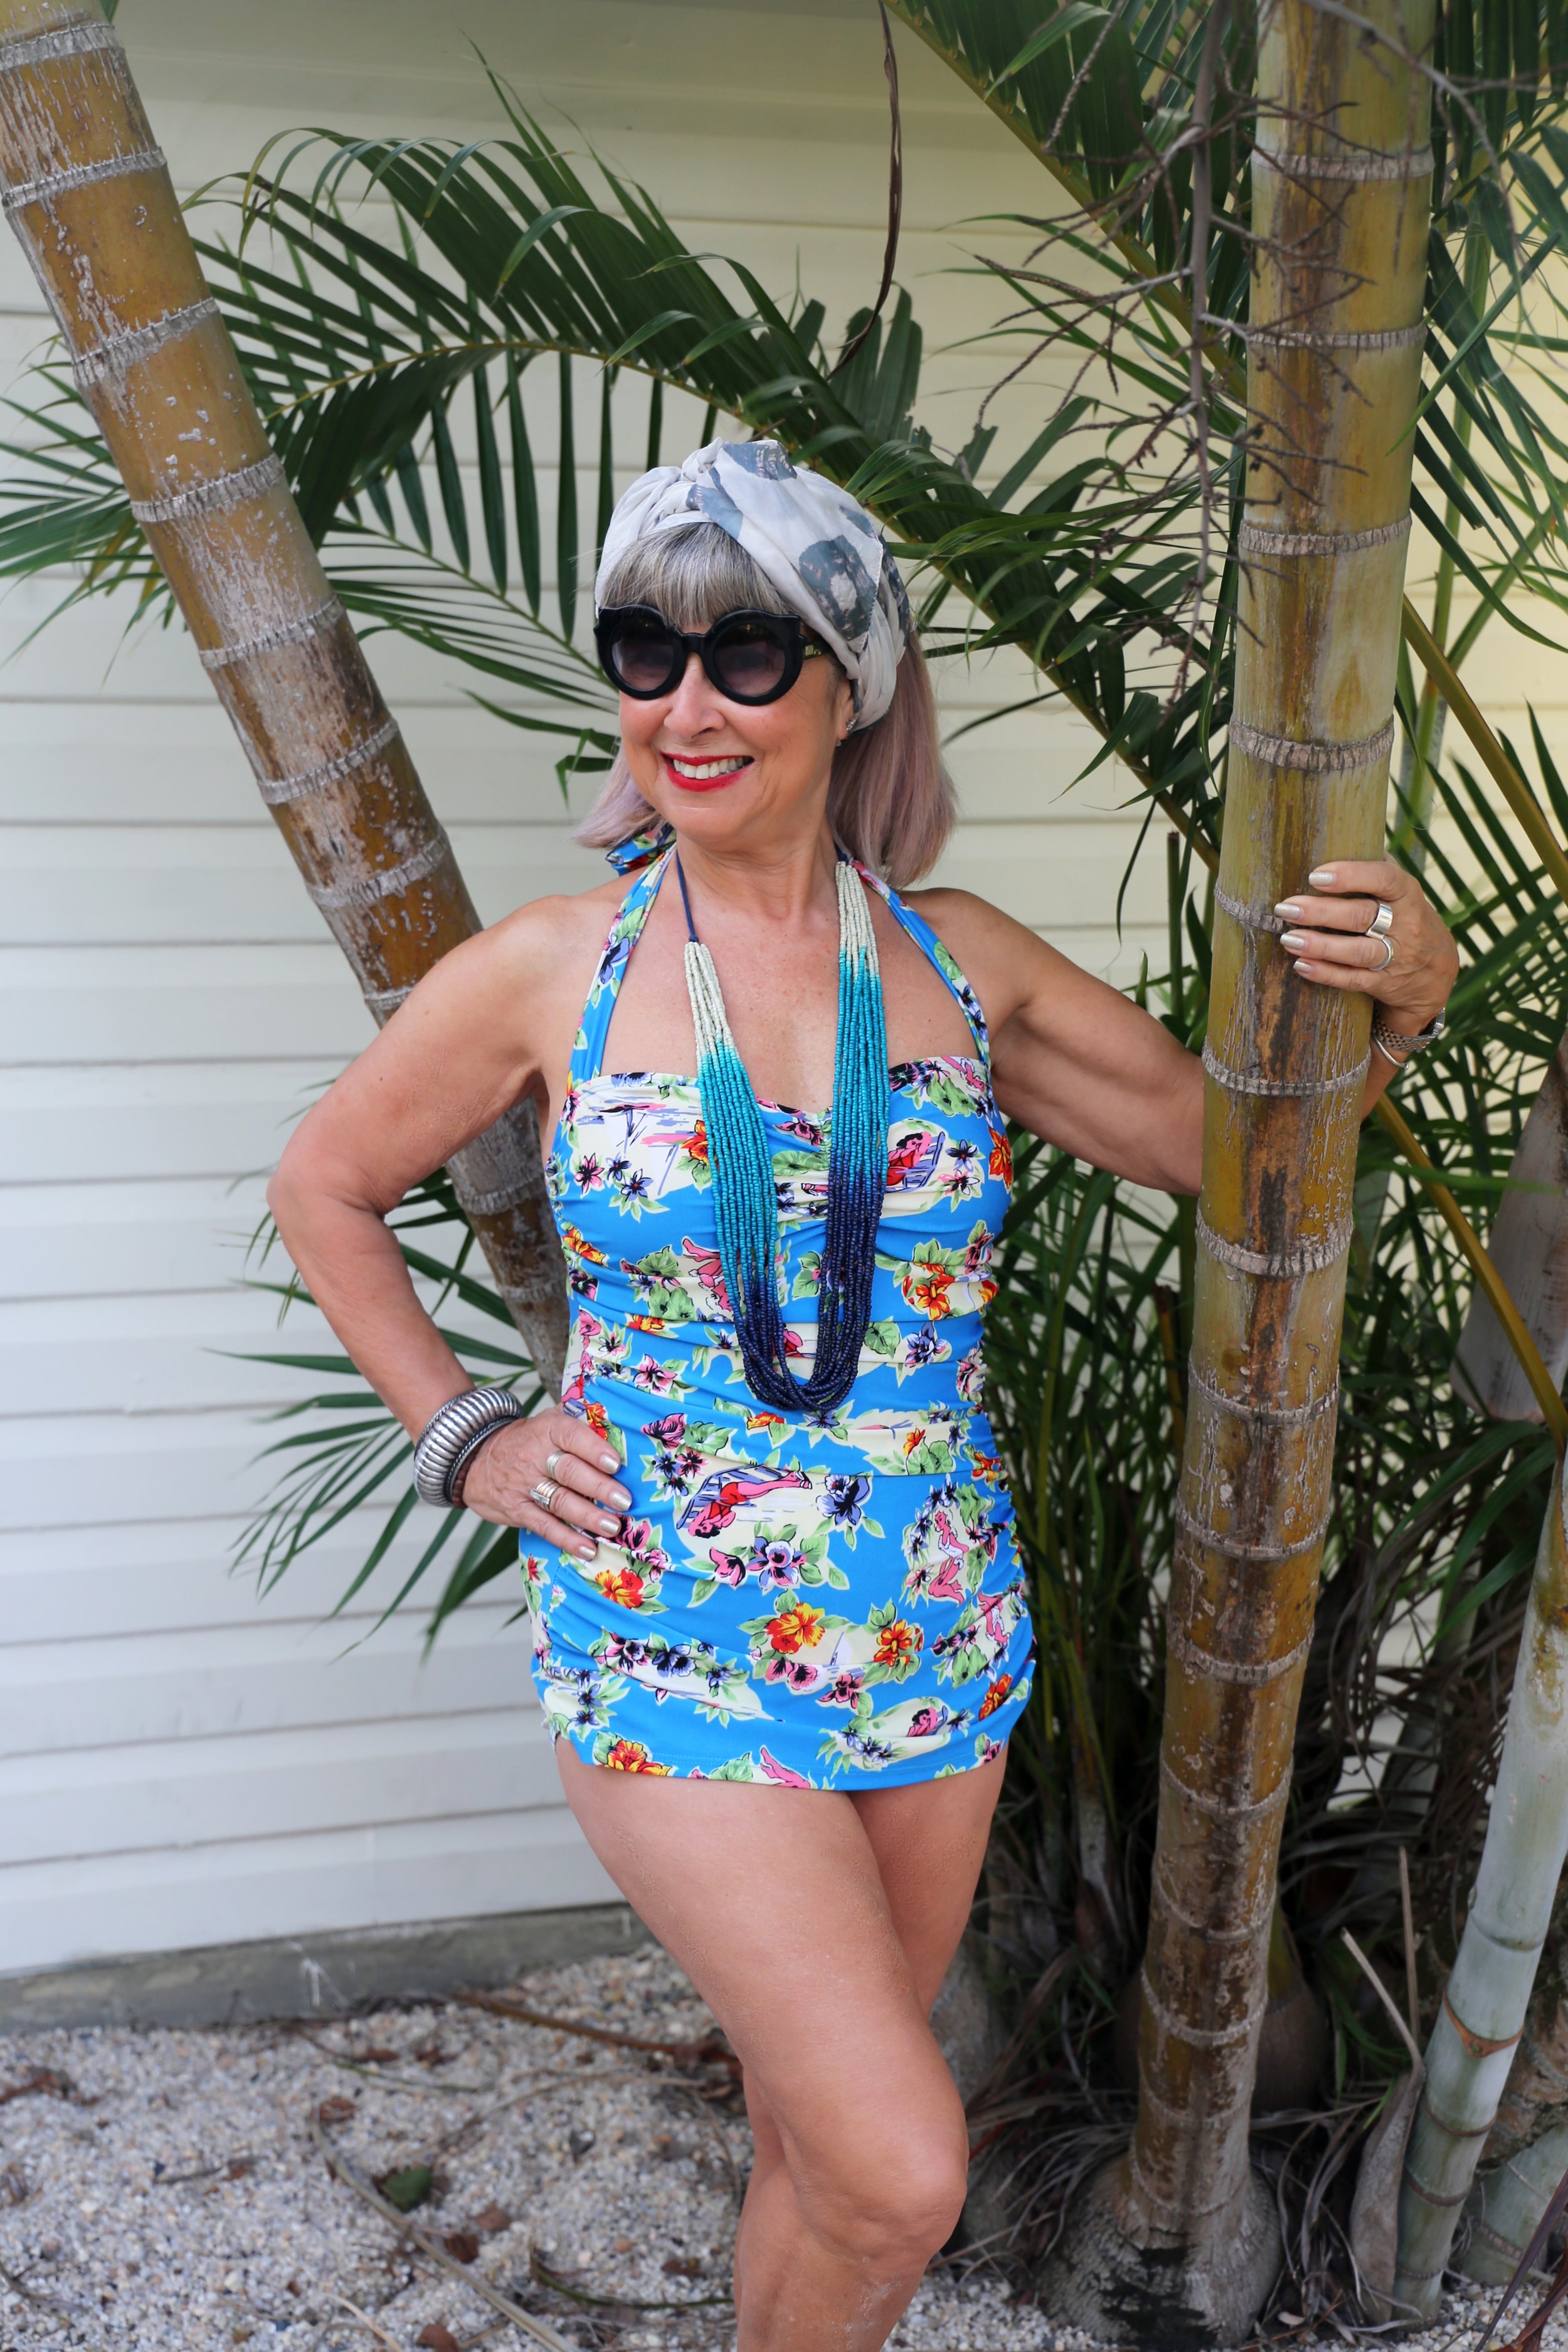 Love my Esther Williams swimsuit, for any age & body type. Fabulous accessories from East Clothing.